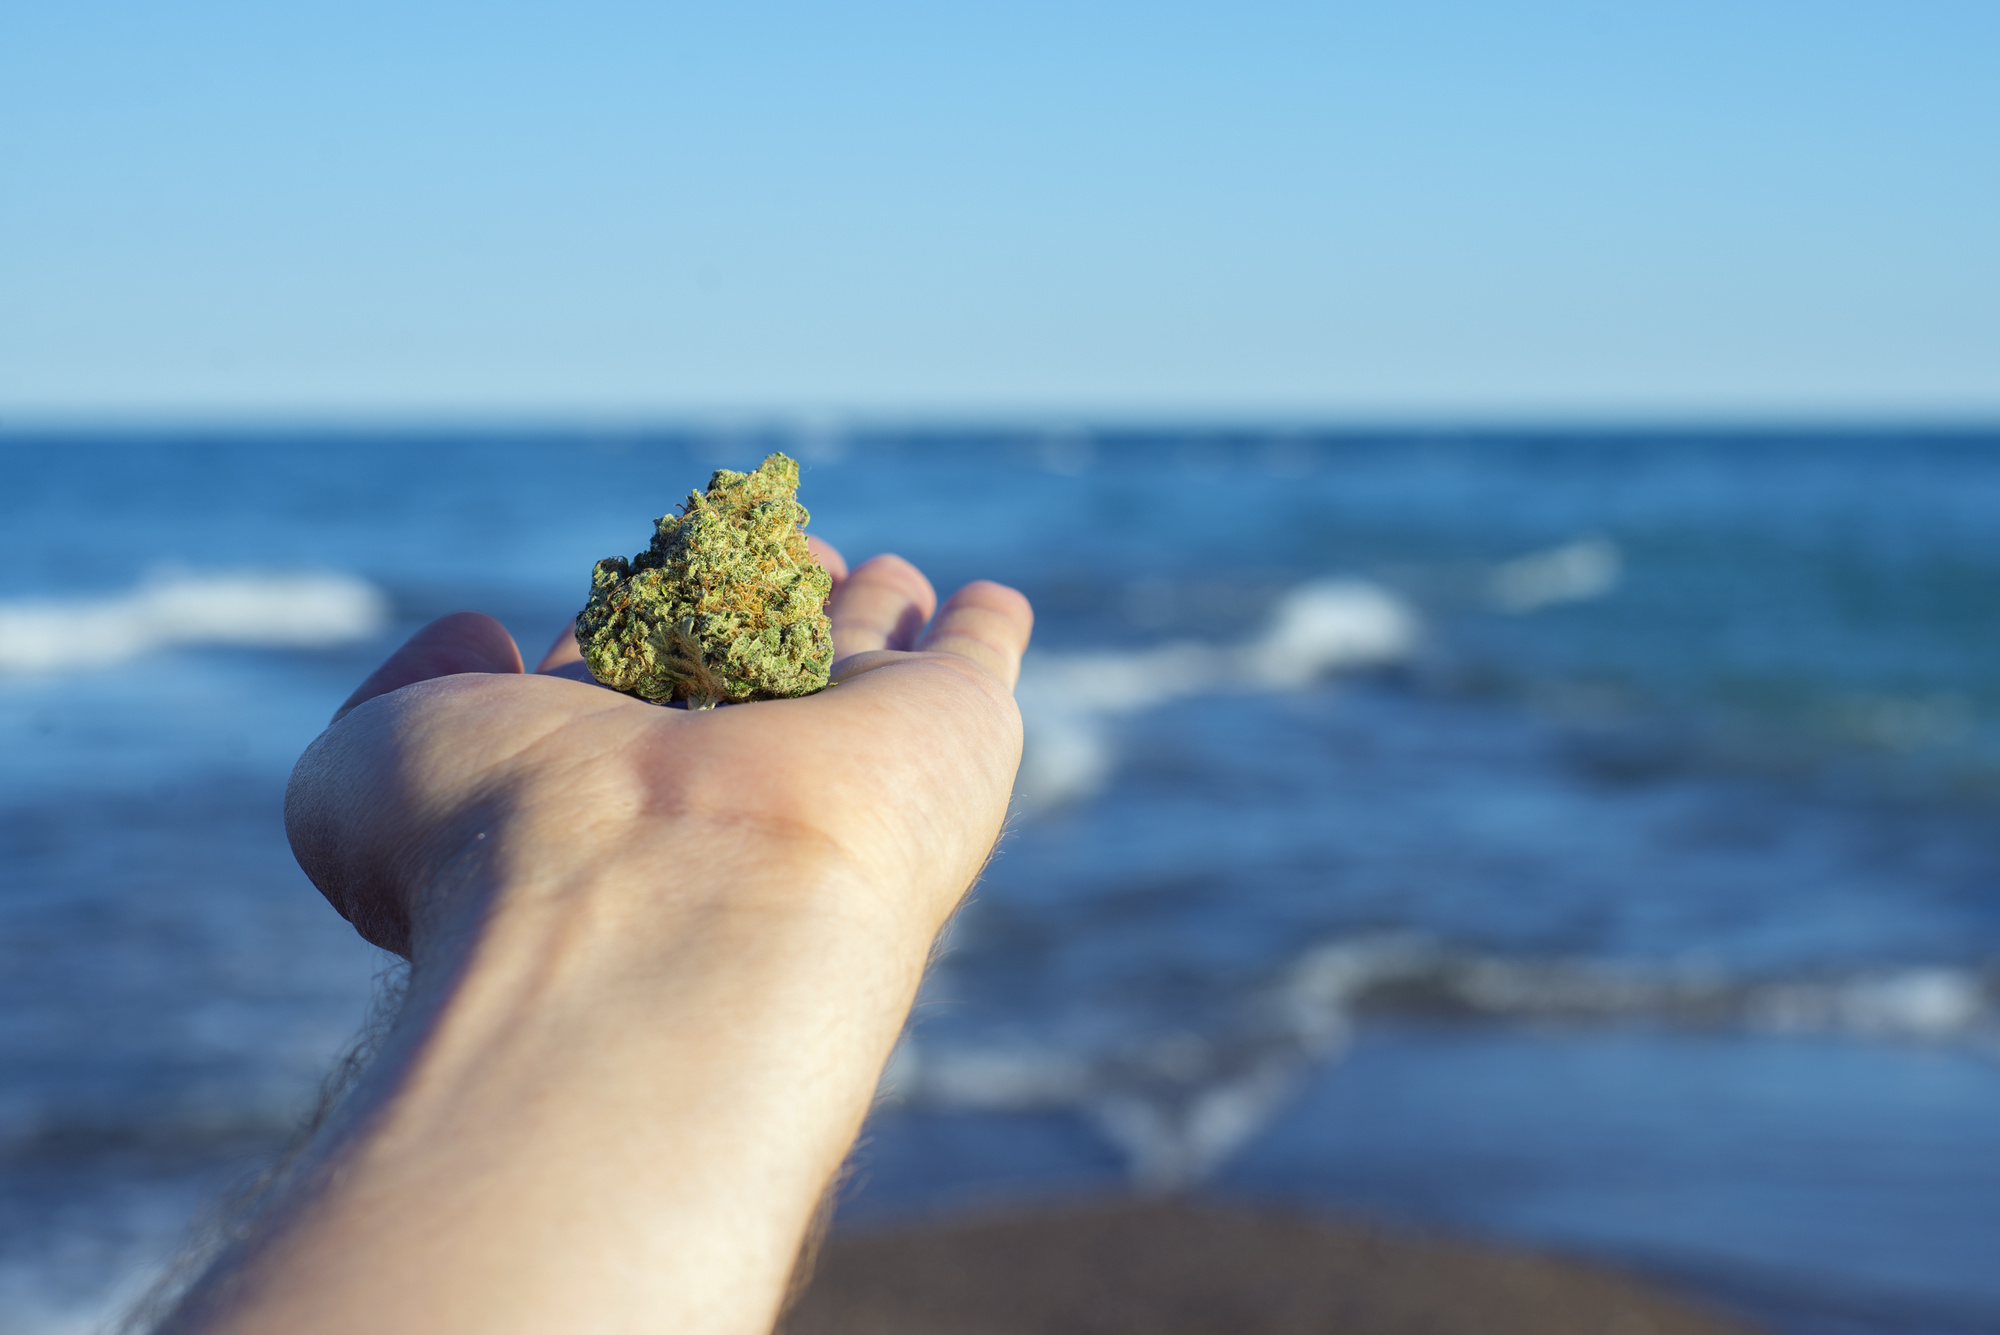 Georgia’s Largest Beach Town Is About to Stop Arresting People For Weed